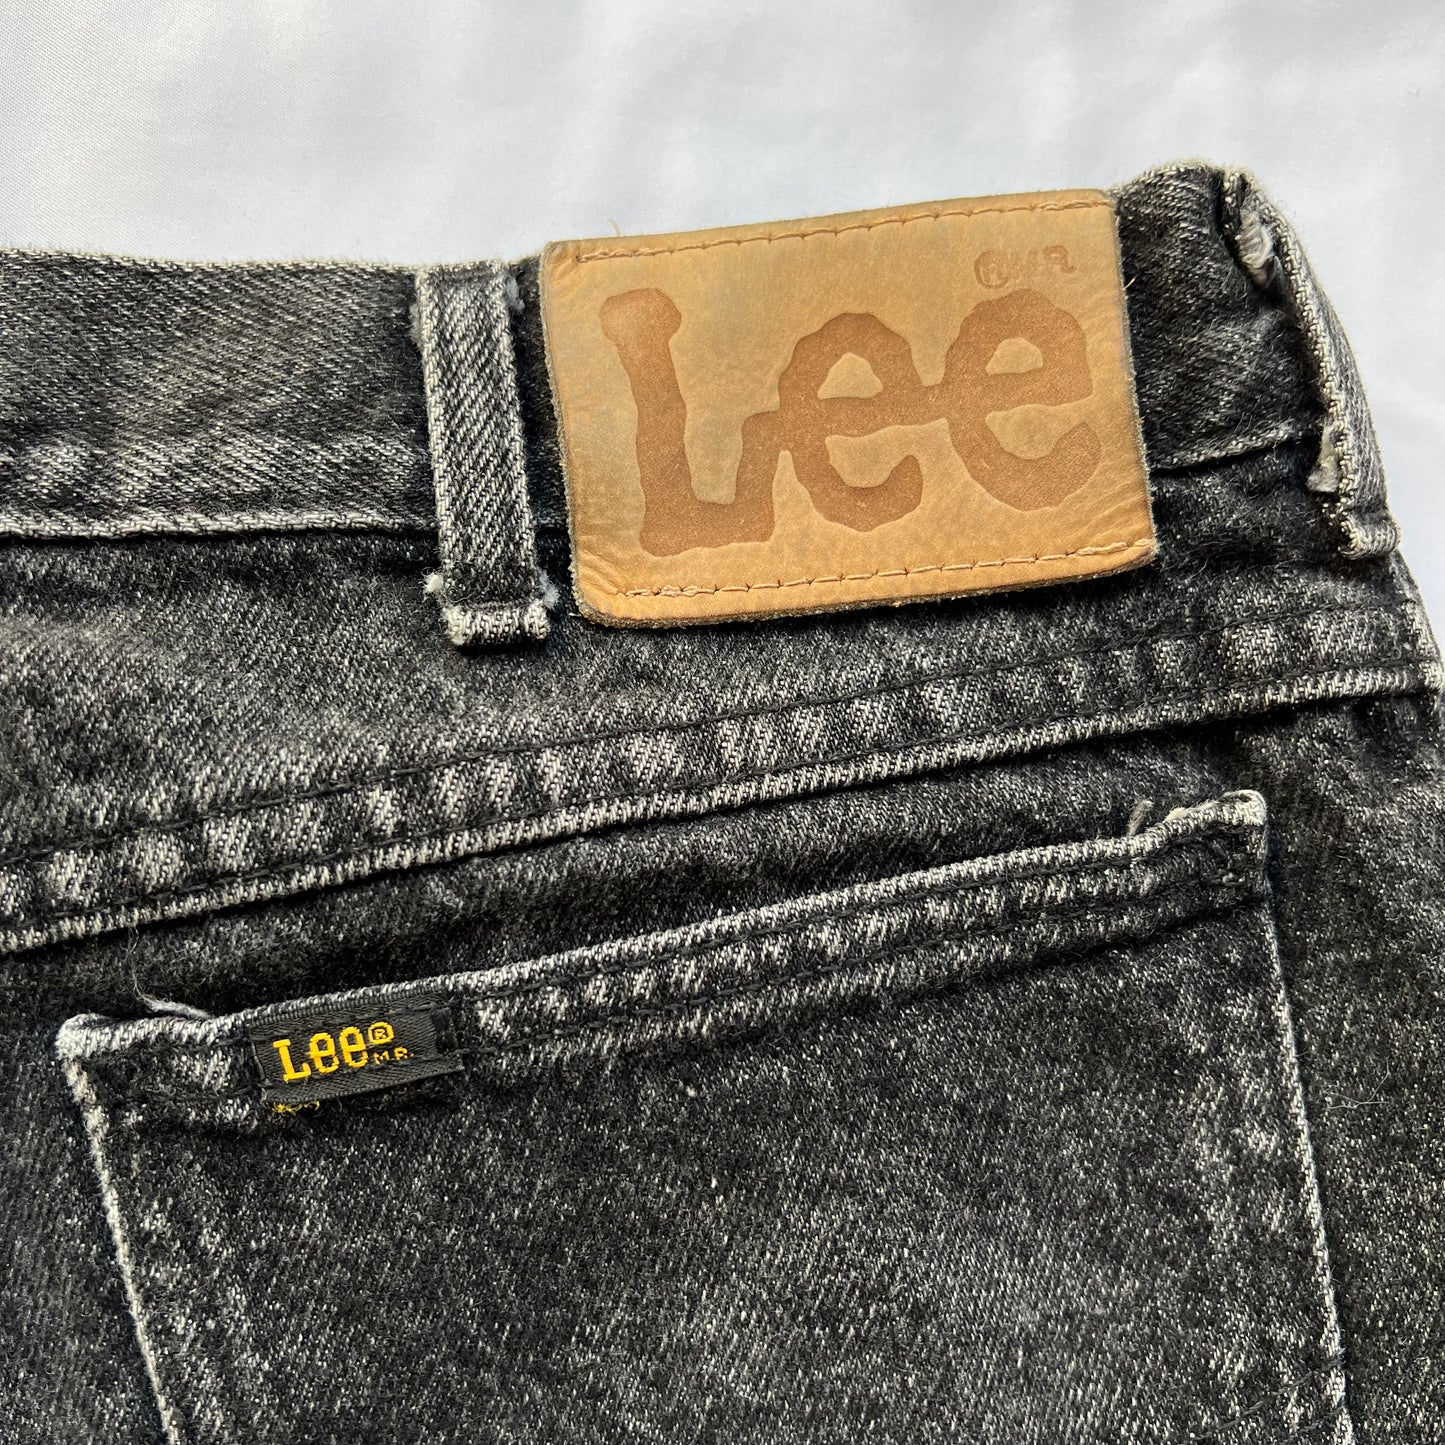 90's Lee RIDERS BLACK JEANS "MADE IN USA"